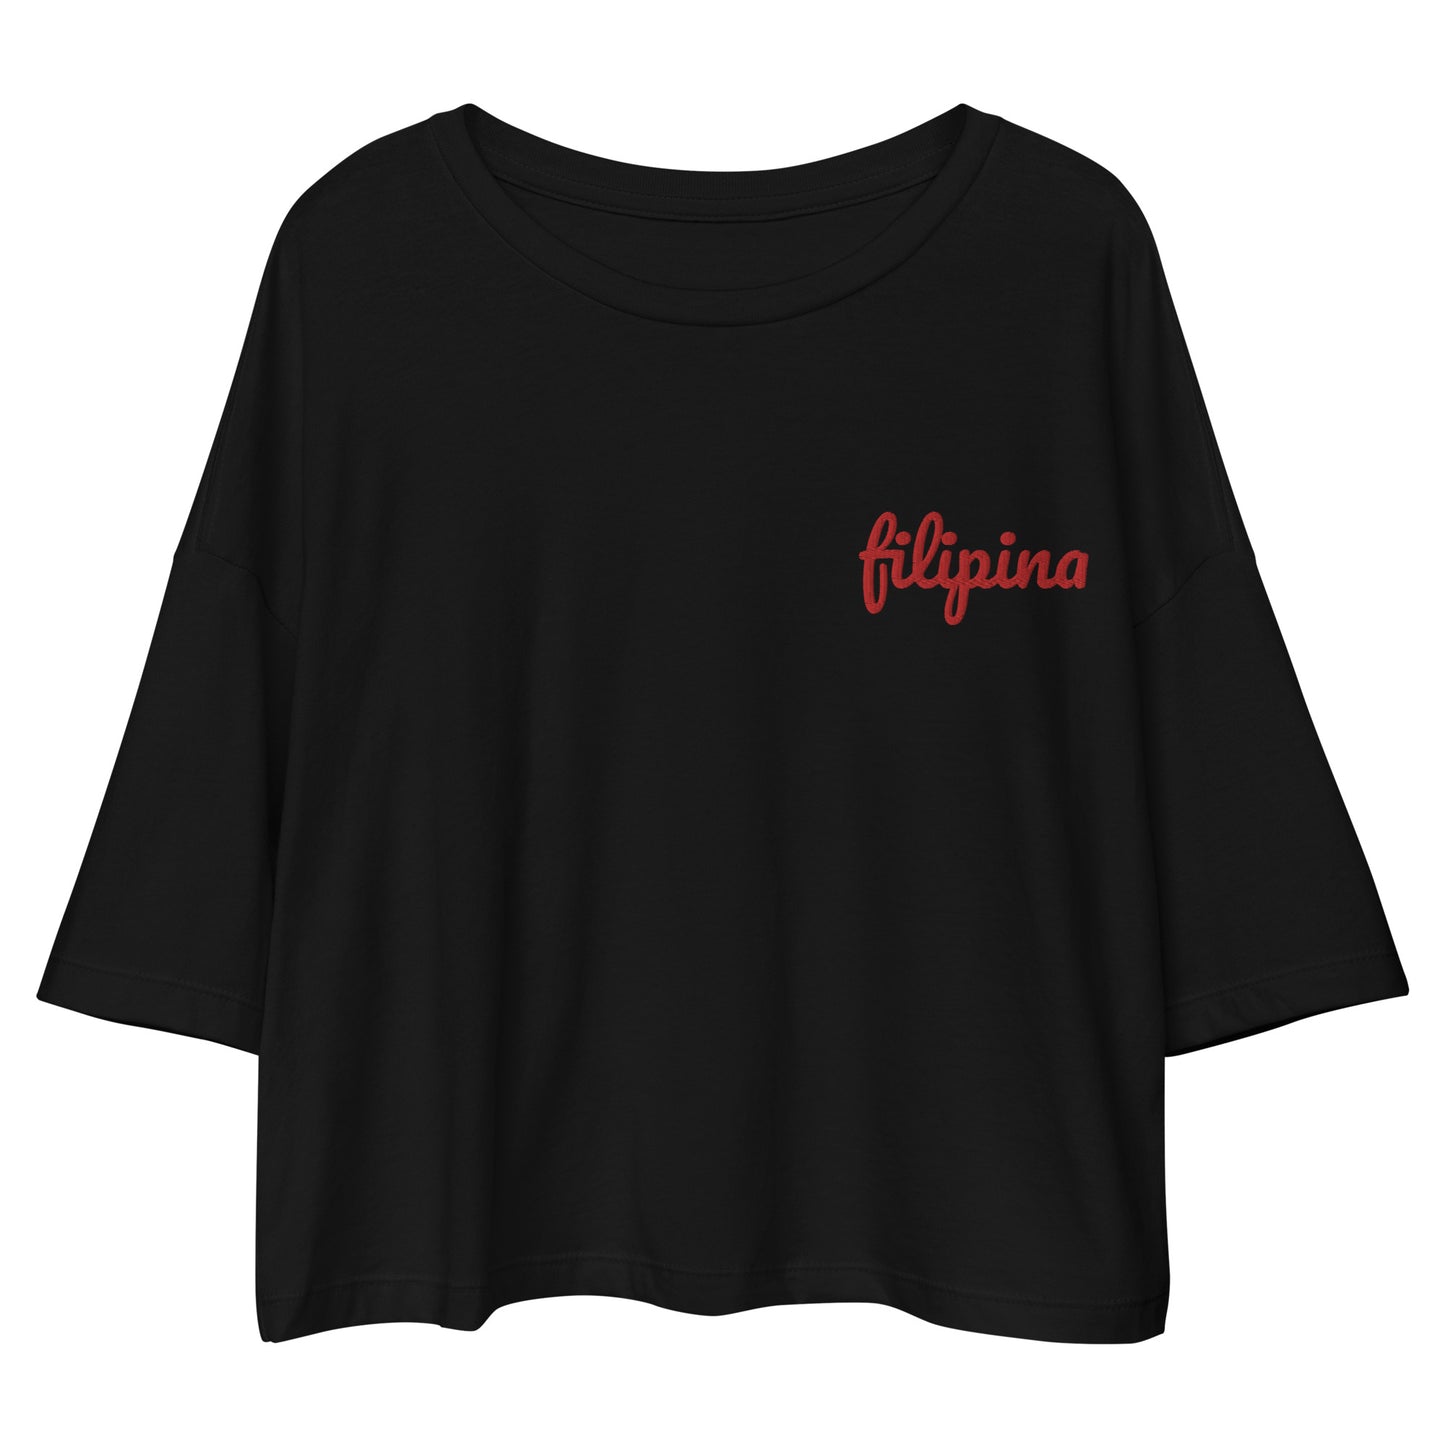 Filipina Embroidered Statement Loose Drop Crop Top in color Black.